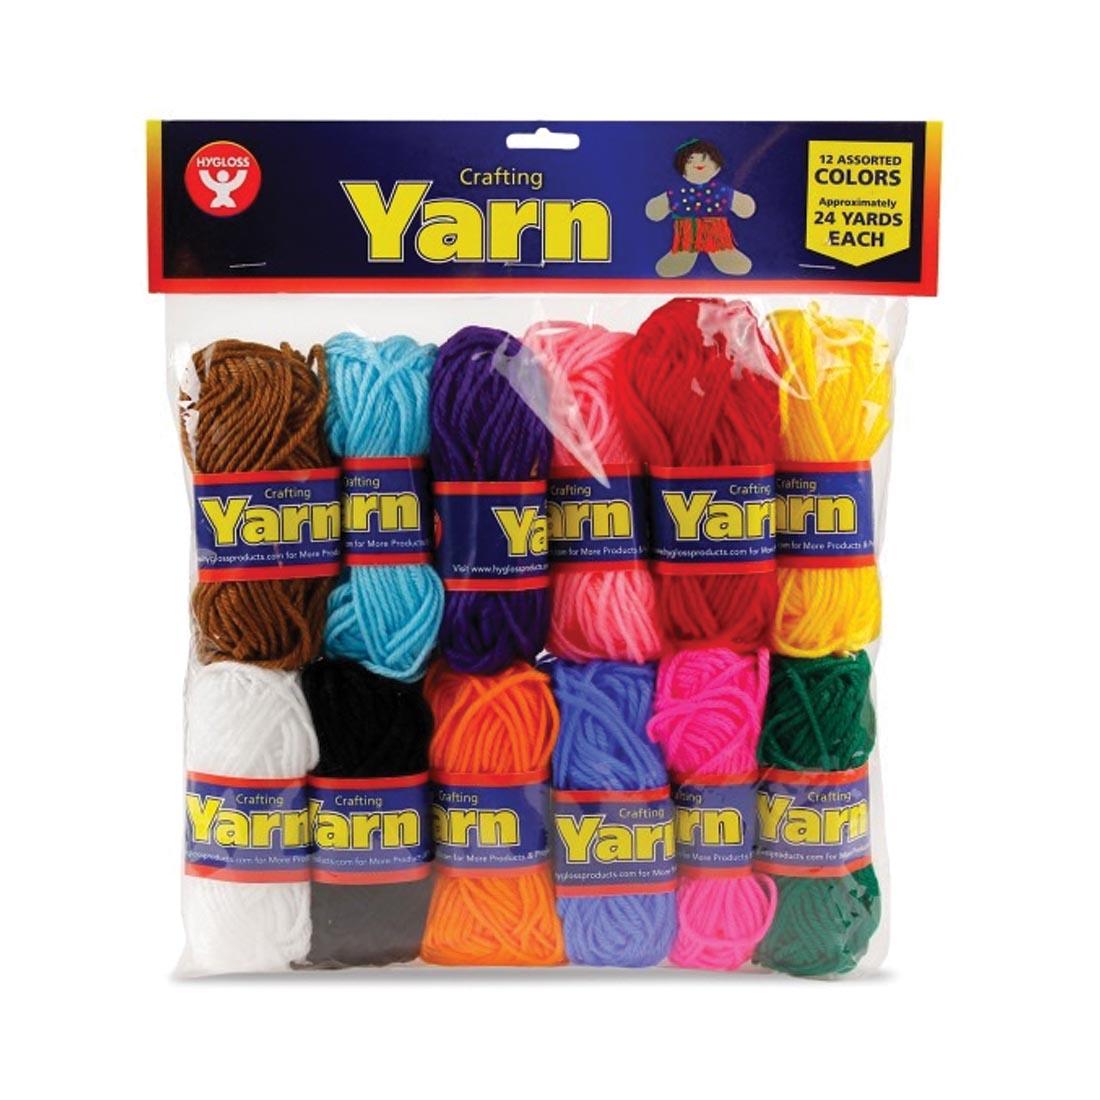 Crafting Yarn Pack by Hygloss